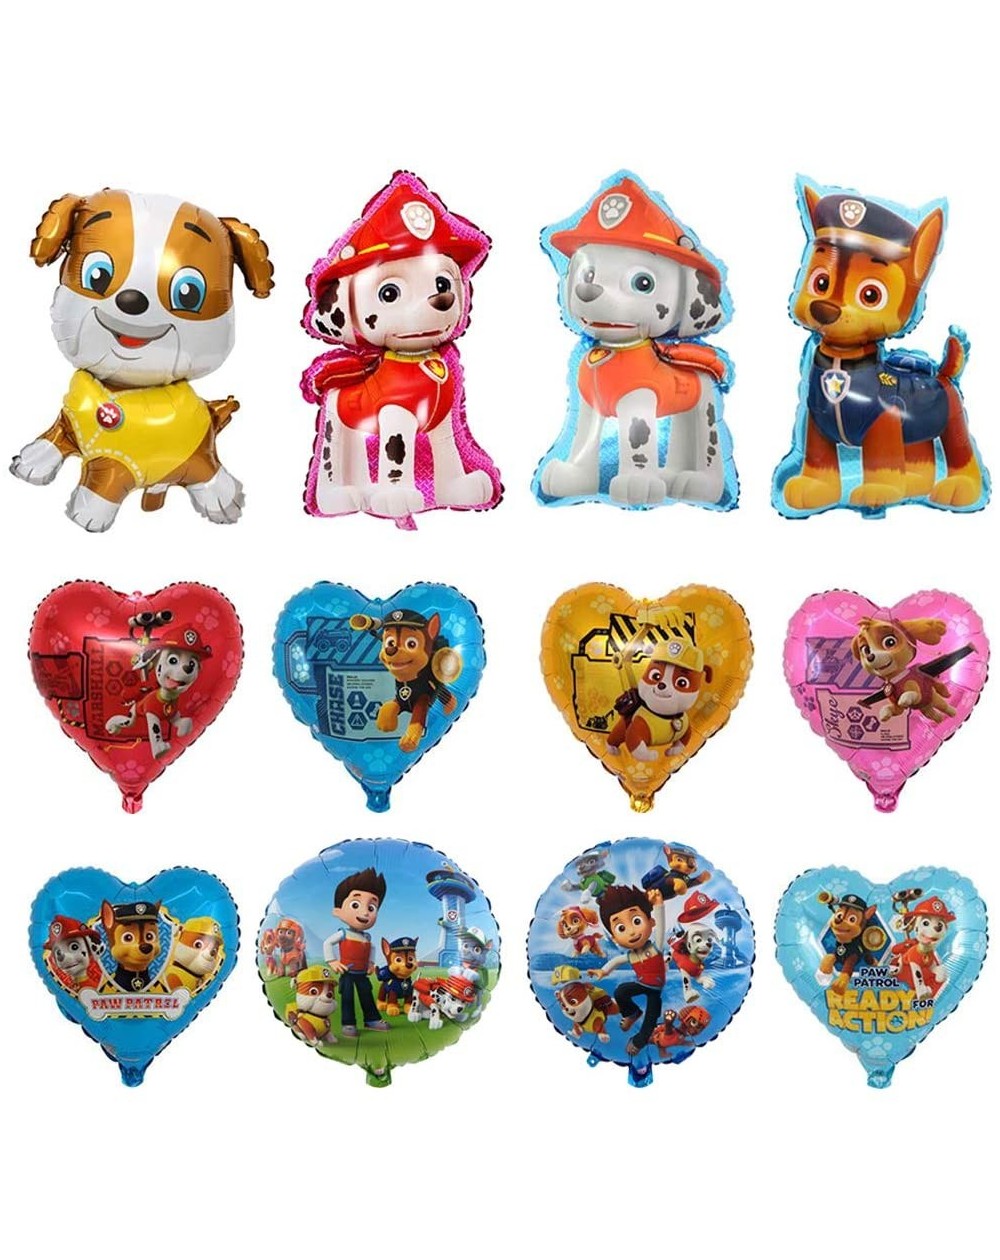 Balloons 12 Pcs Paw Dog Patrol Helium Foil Balloons-Dog Theme Birthday Party Decoration for Kids - CD18A9ULC97 $16.90